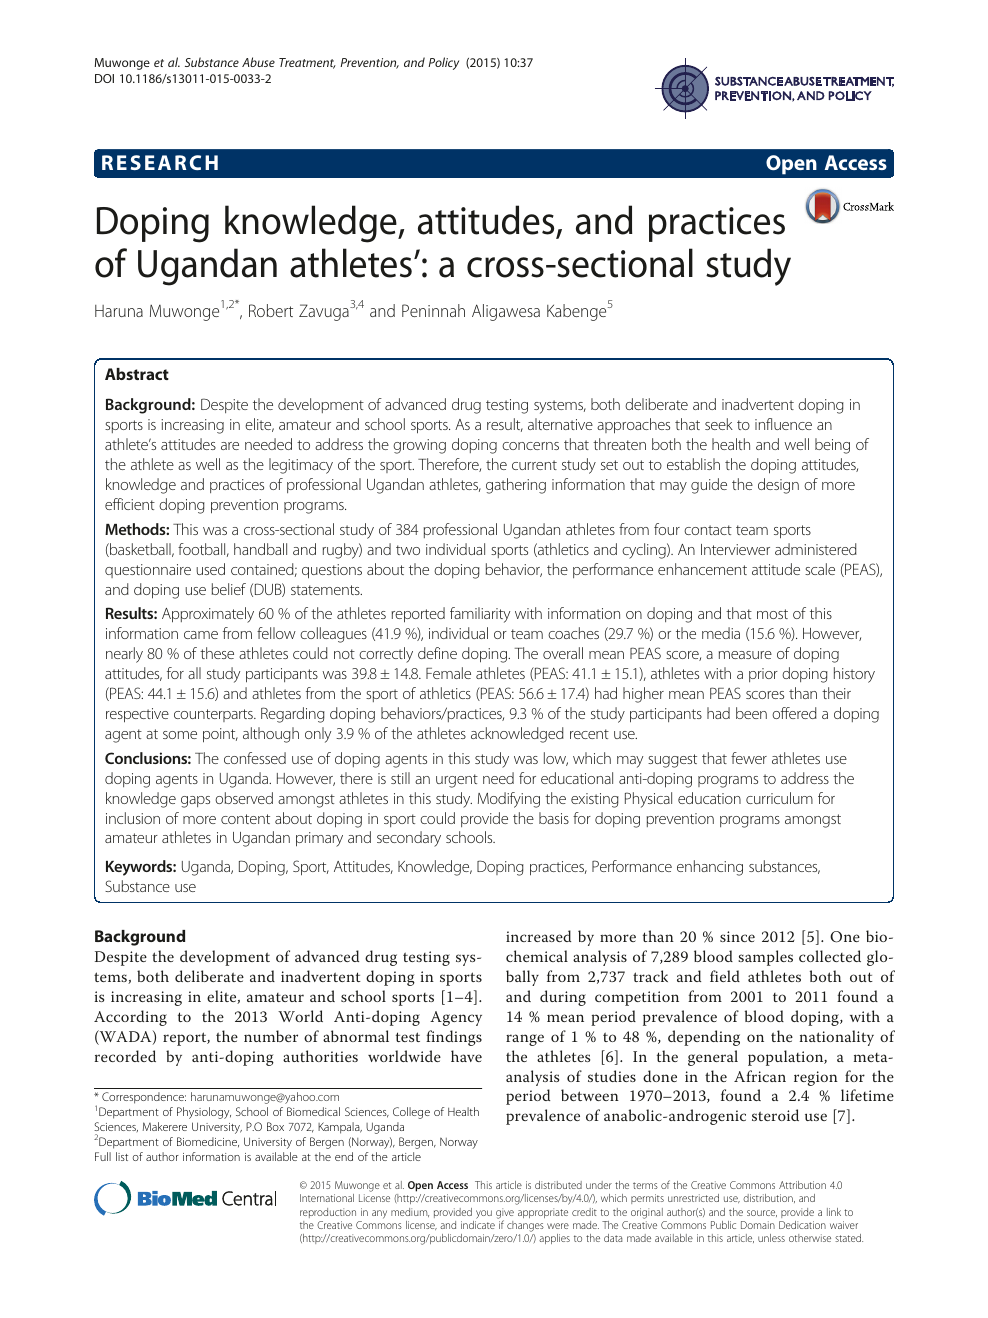 Doping knowledge, attitudes, and practices of Ugandan athletes a cross-sectional study pic